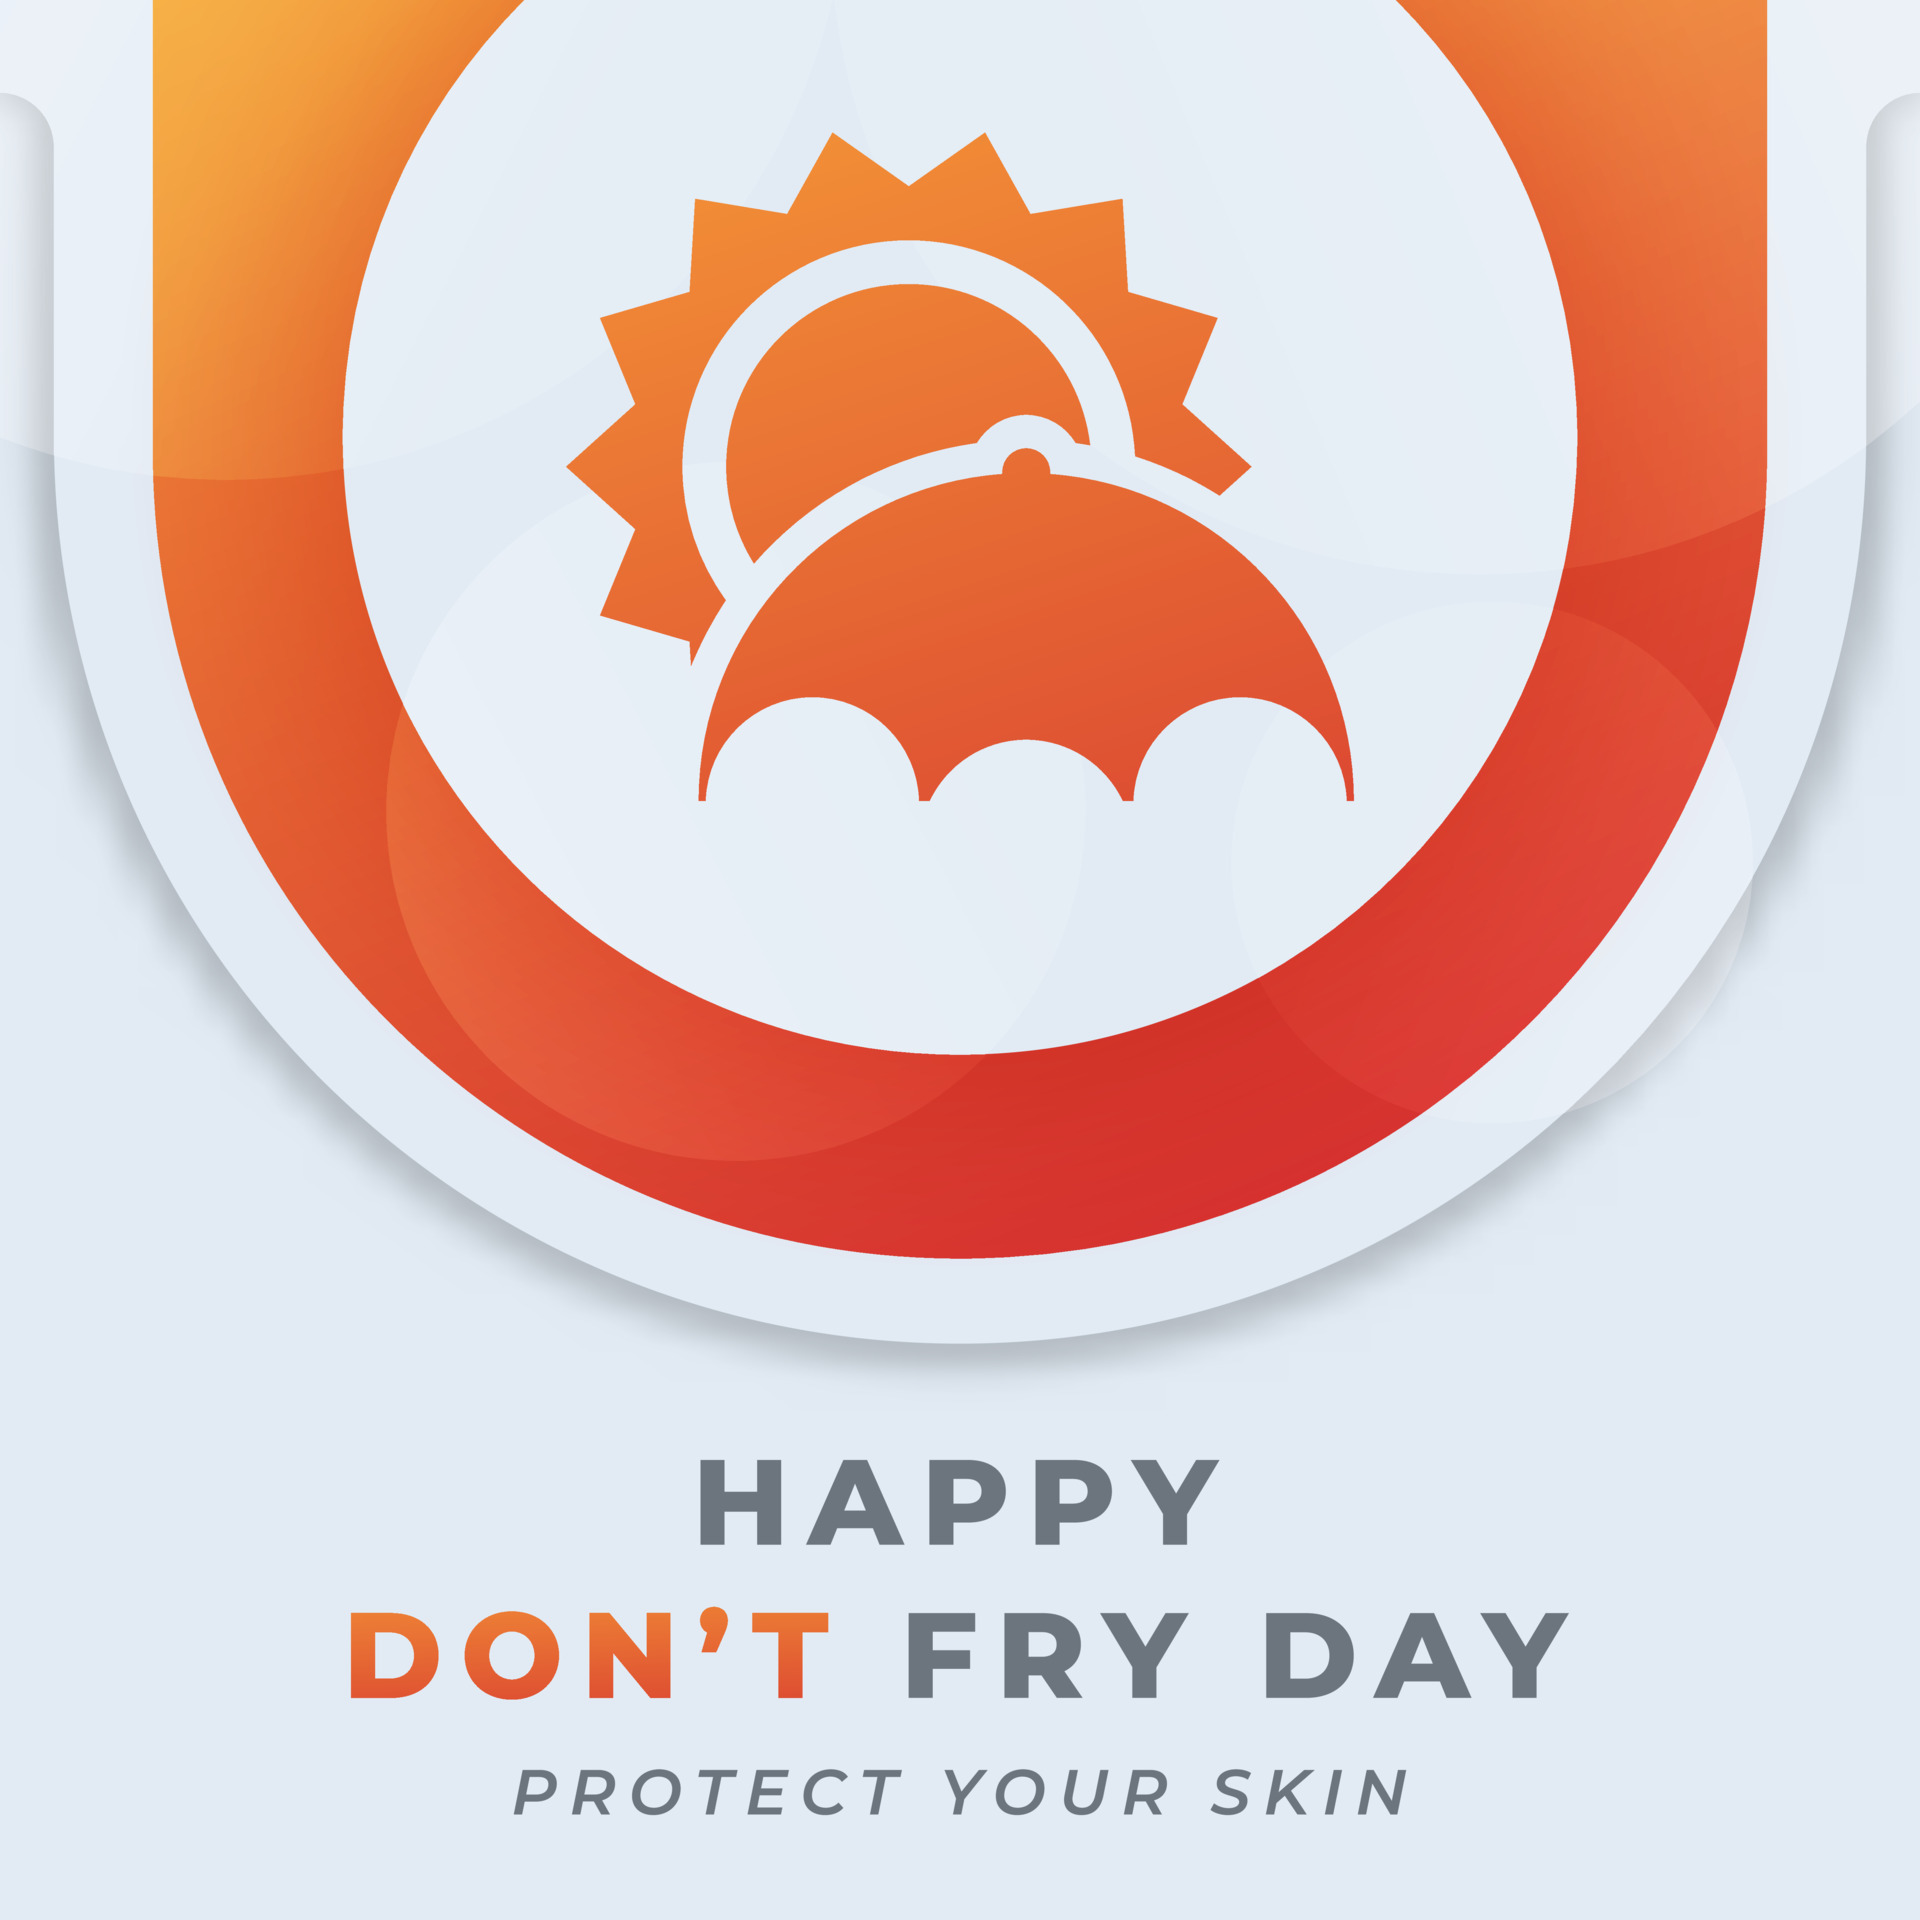 https://static.vecteezy.com/system/resources/previews/021/370/098/original/happy-don-t-fry-day-celebration-design-illustration-for-background-poster-banner-advertising-greeting-card-vector.jpg